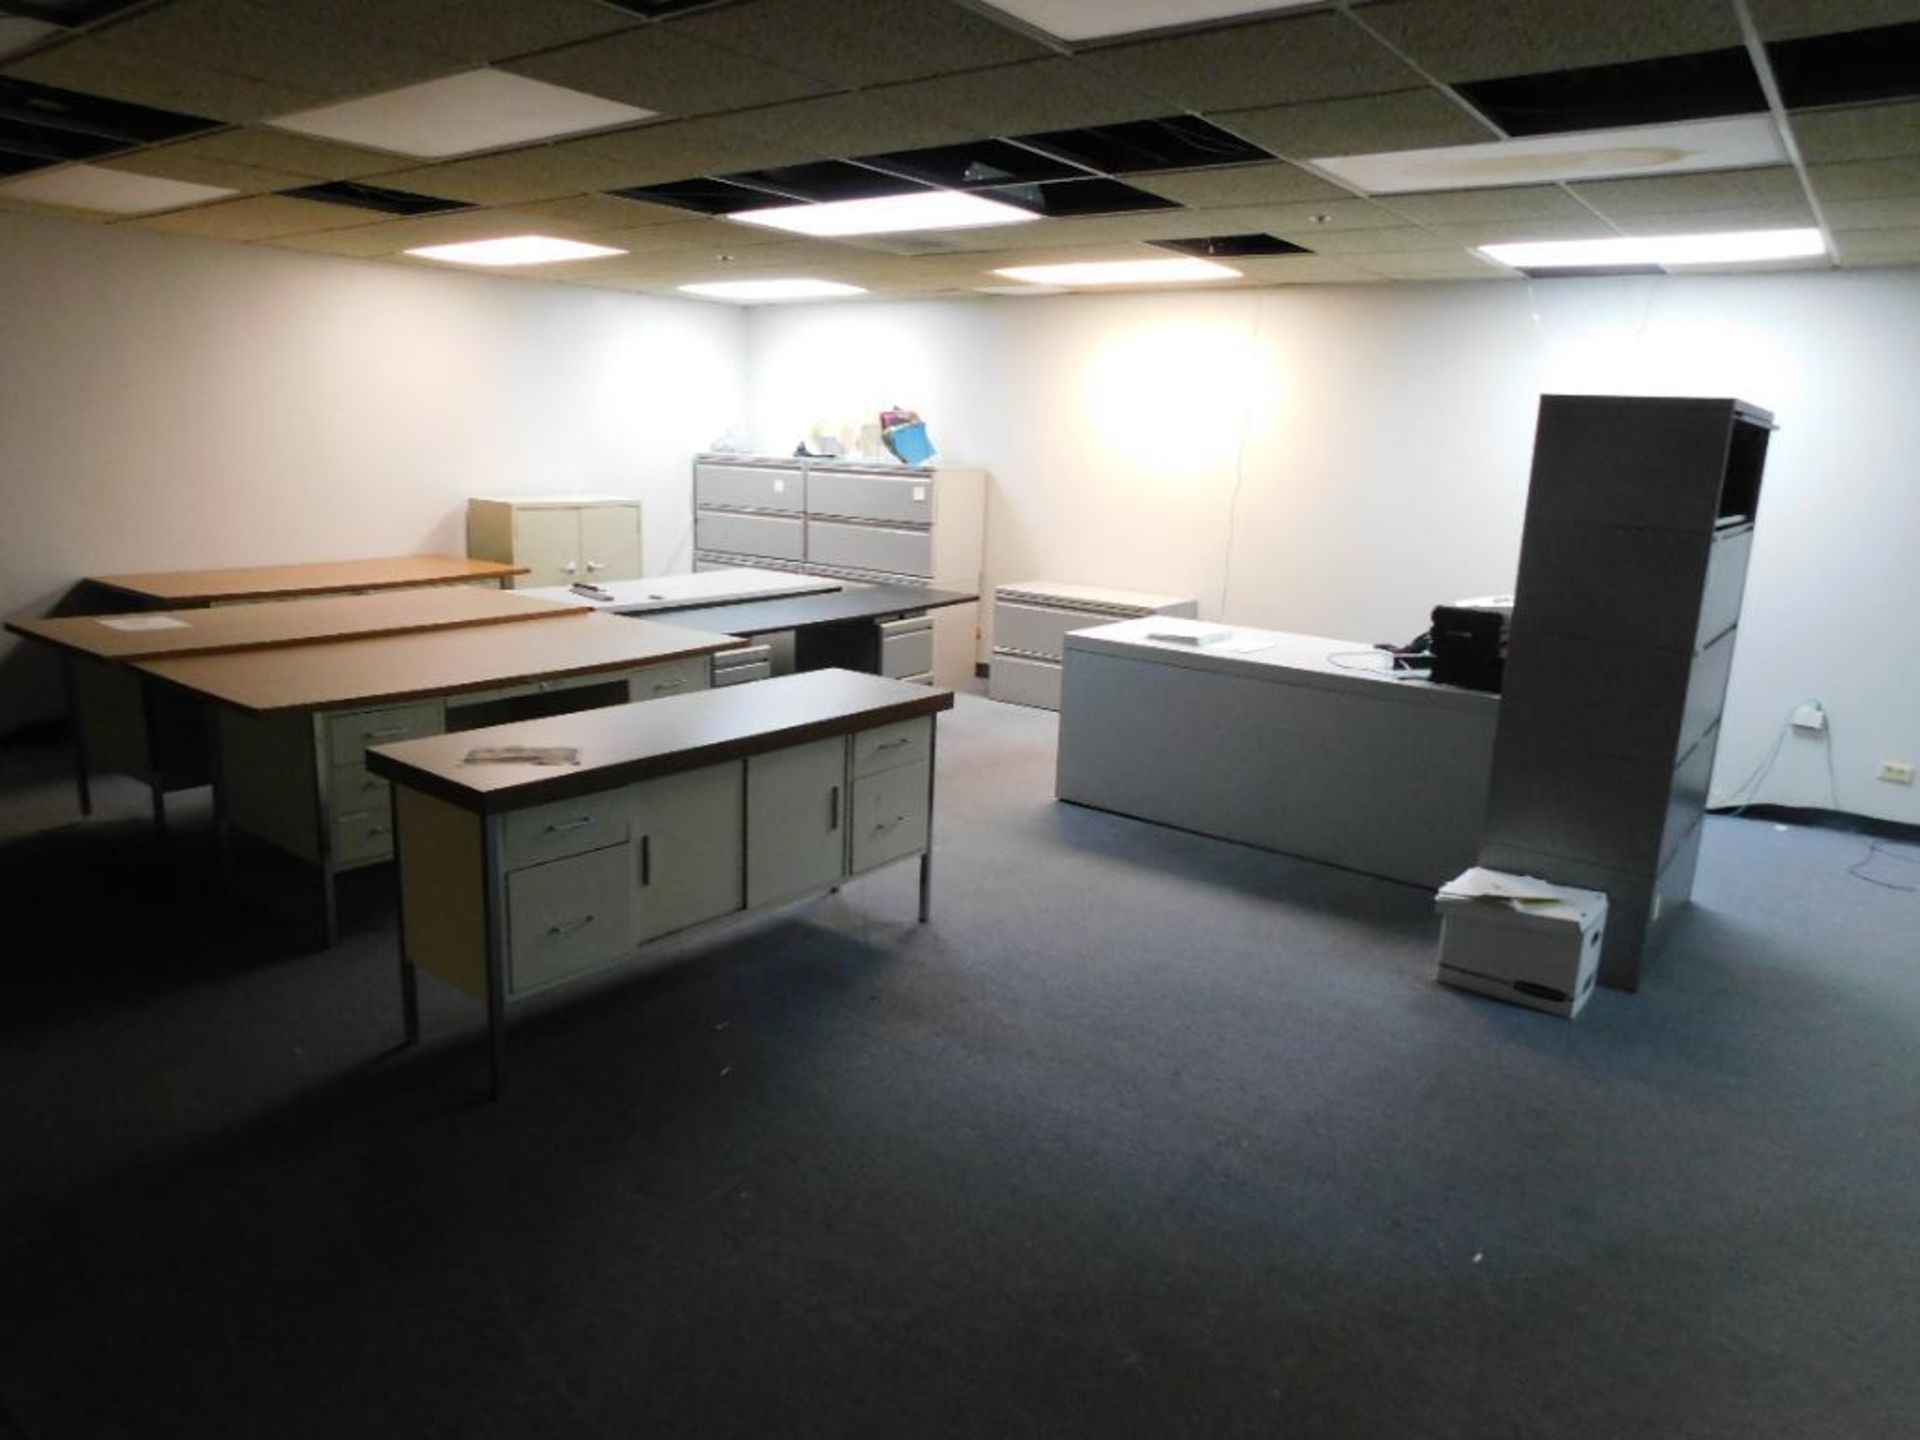 LOT: Contents of 2nd Floor Offices (NO ELEVATOR): Desks, File Cabinets, Book Cases, Chairs, Tables, - Image 9 of 9